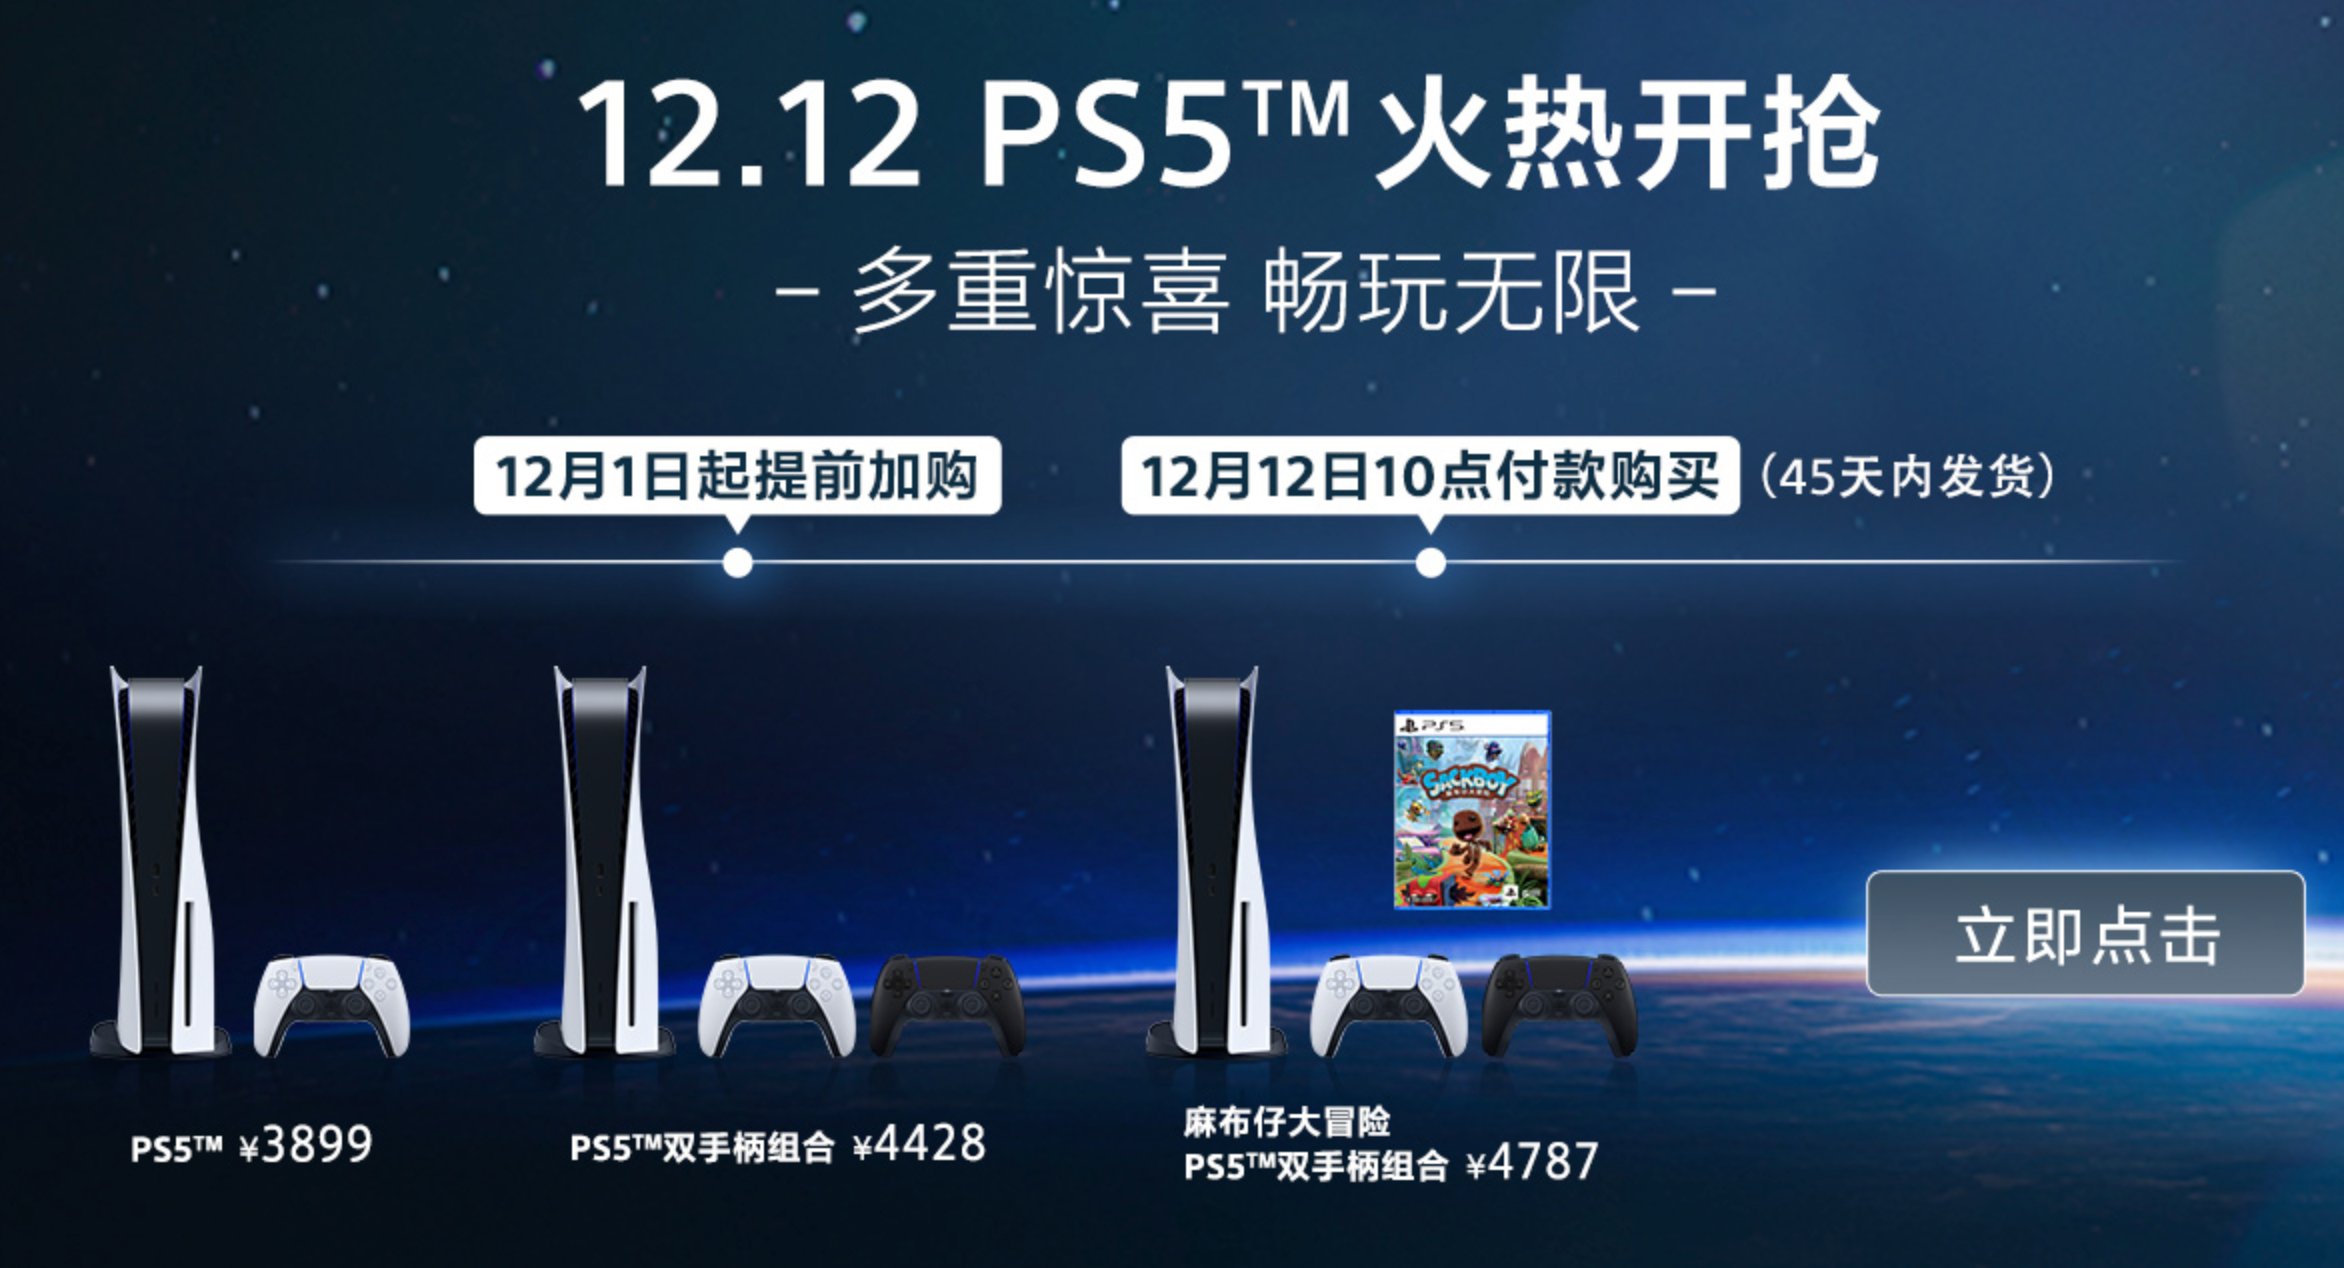 evening What's wrong Alarming Daniel Ahmad on Twitter: "The PS5 (China ver.) is continuing to sell out in  China every time it becomes available. Many still turning to the grey  market. The PlayStation store (on TMall)